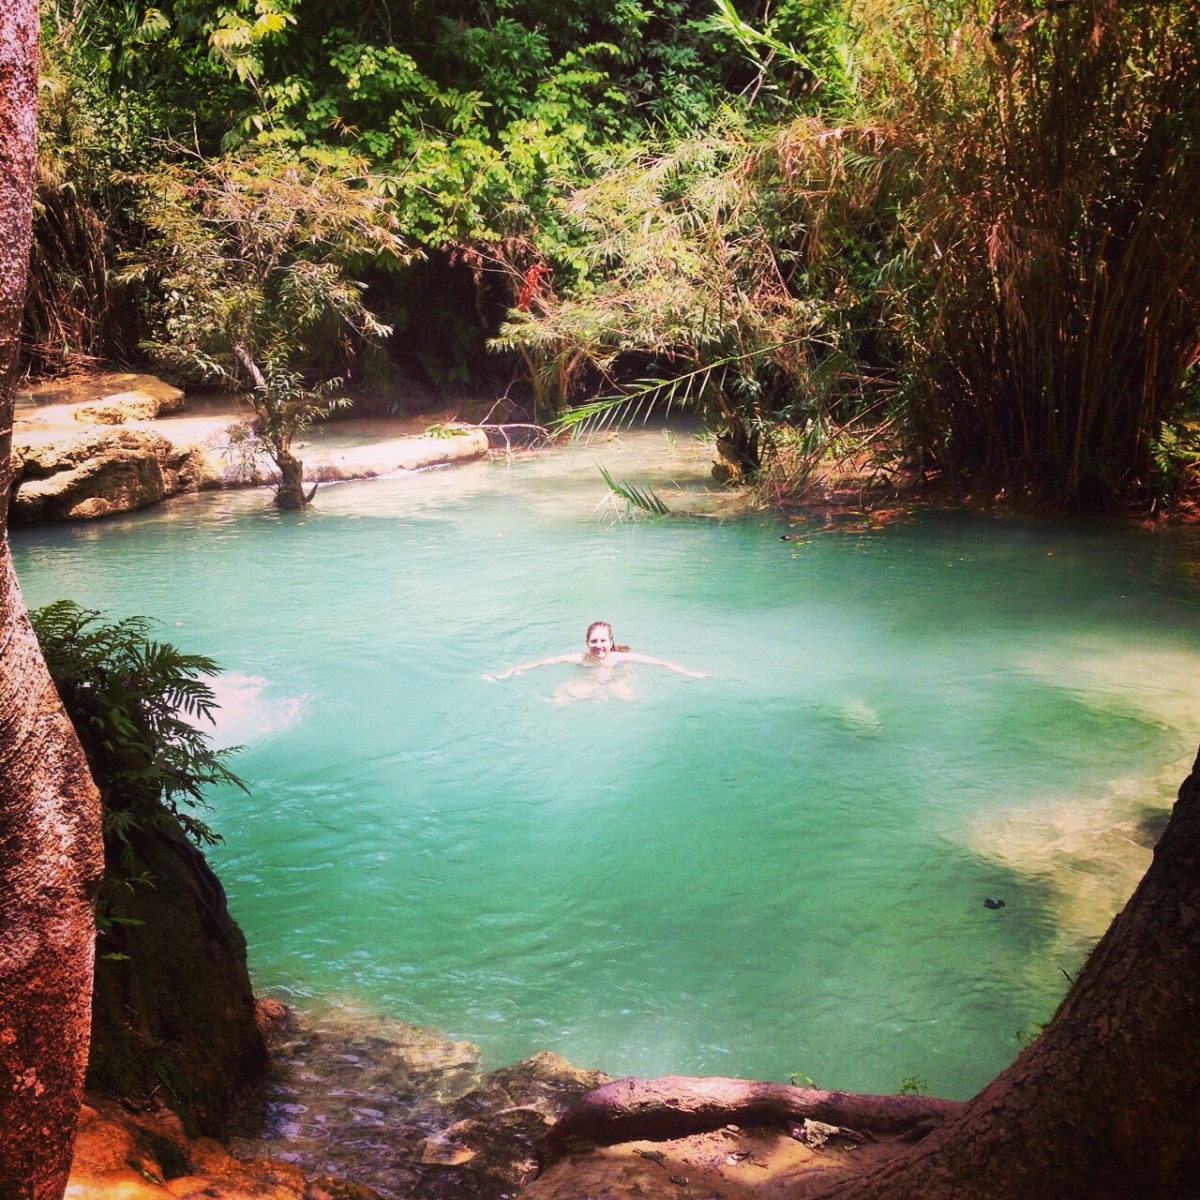 Katherine Conaway swims in the middle of an emerald green pool in Laos with green trees around the swimming hole